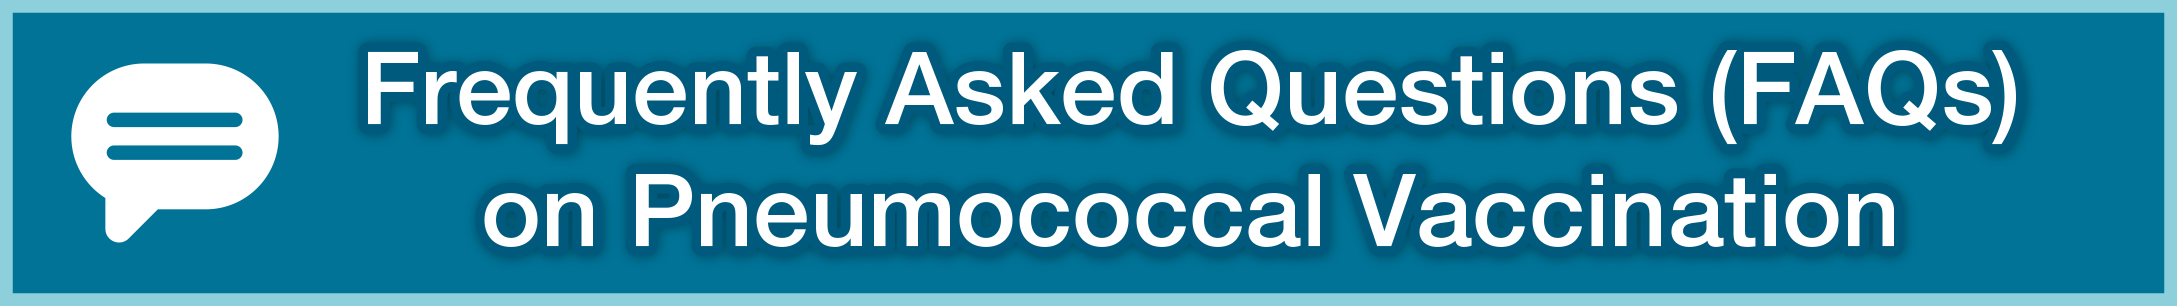 Frequently Asked Questions (FAQs) on Pneumococcal Vaccination